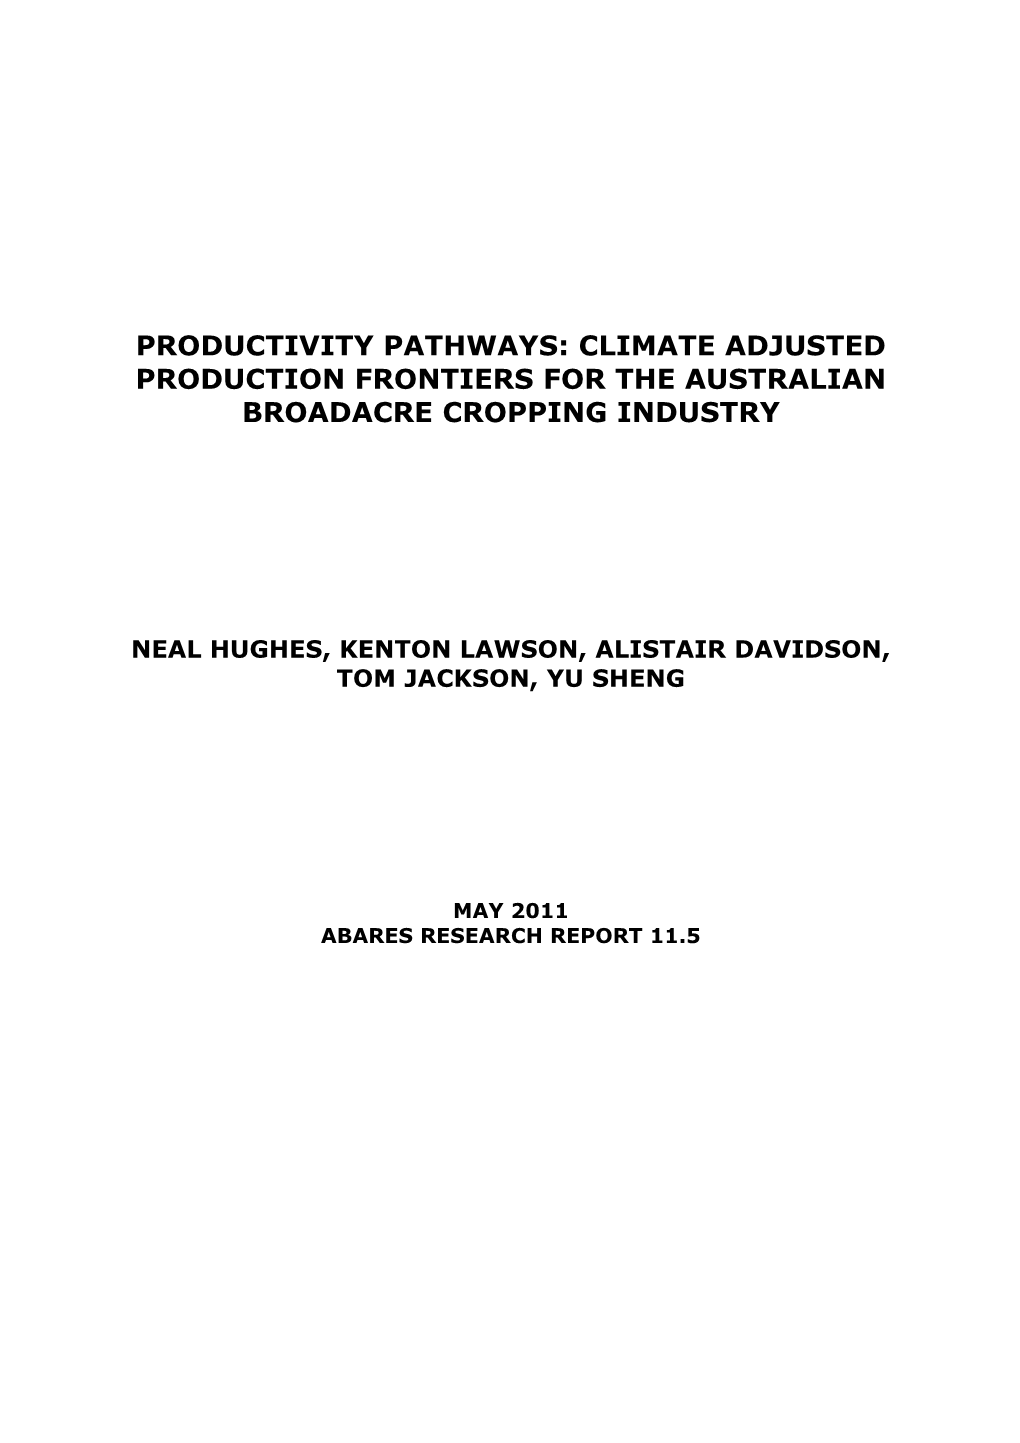 Productivity Pathways: Climate Adjusted Production Frontiers for the Australian Broadacre